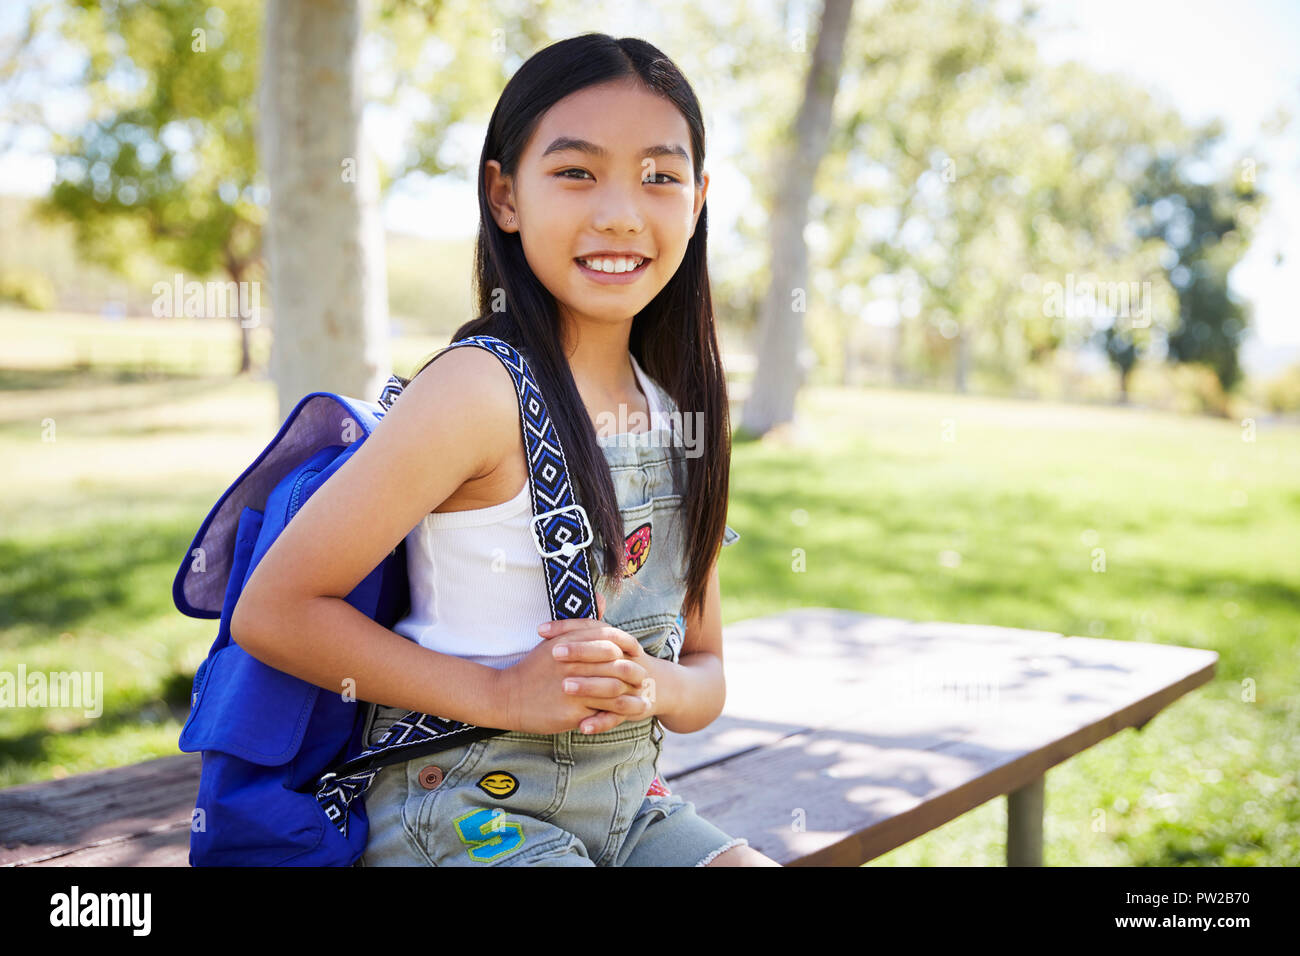 Young Asian smiling schoolgirl looking to camera, portrait Stock Photo